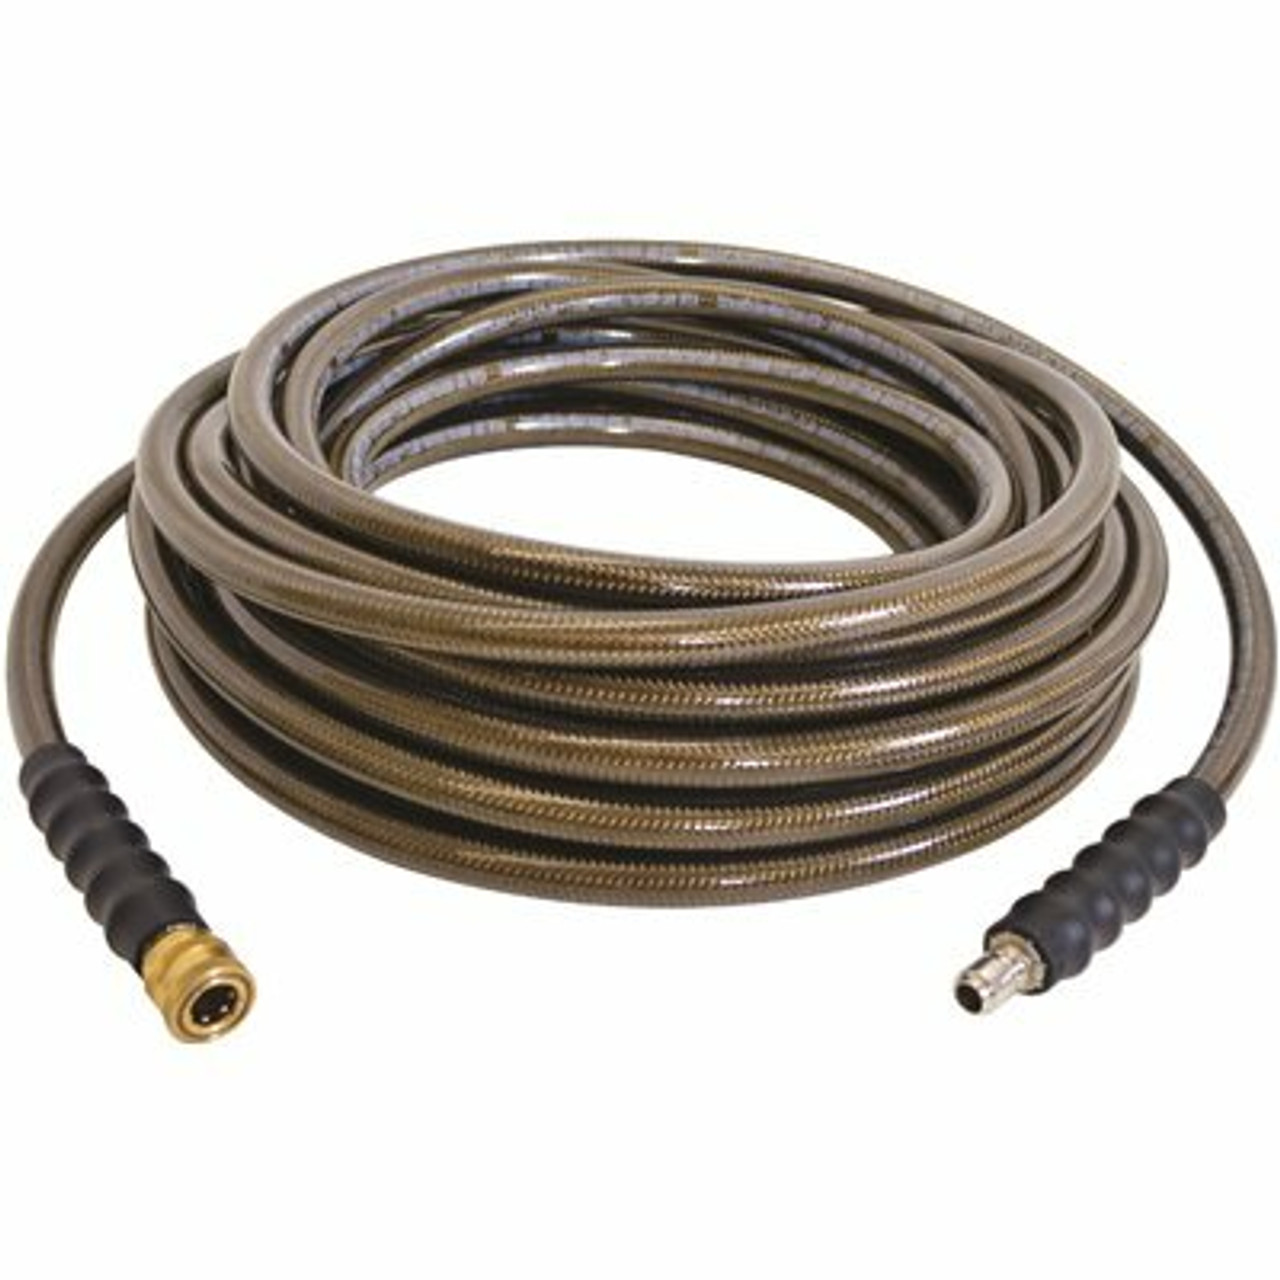 Simpson Monster Hose 3/8 In. X 50 Ft. Hose Attachment For 4500 Psi Pressure Washers